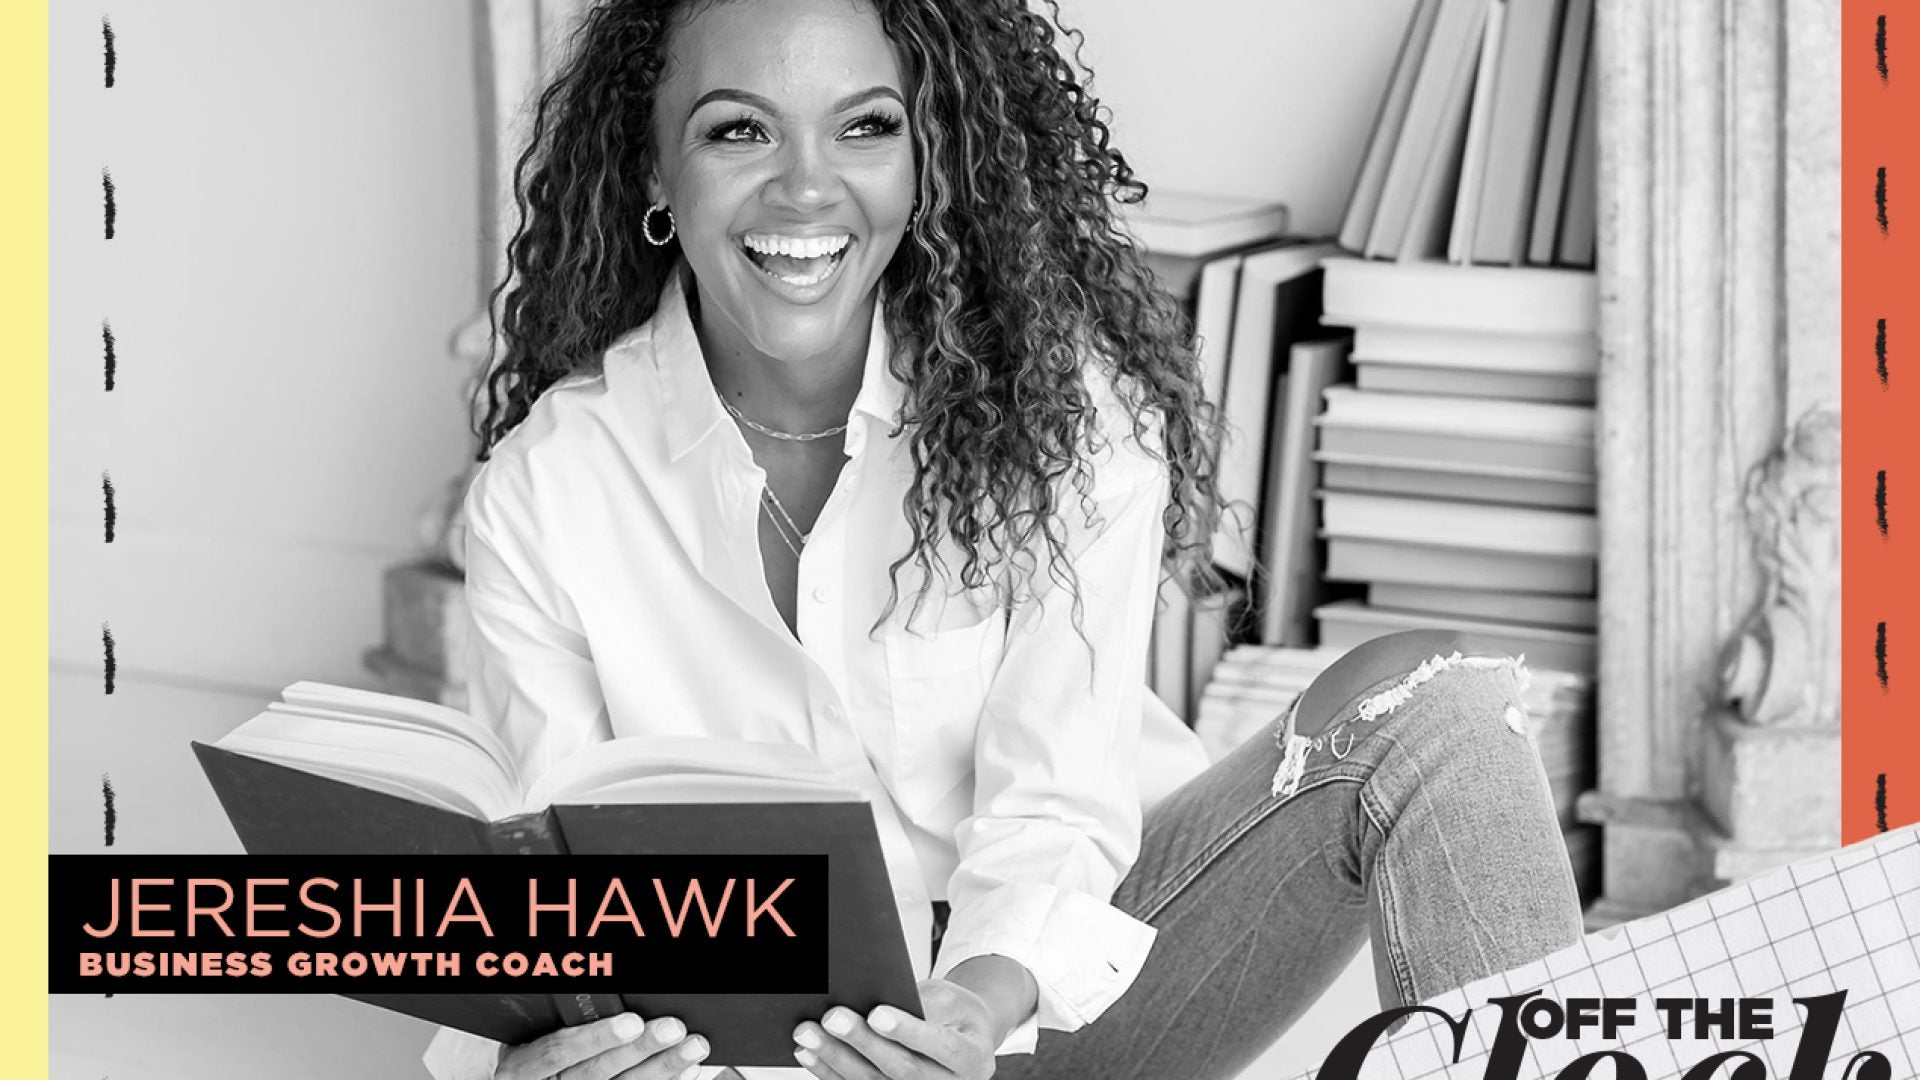 Off The Clock With Business Growth Coach, Jereshia Hawk